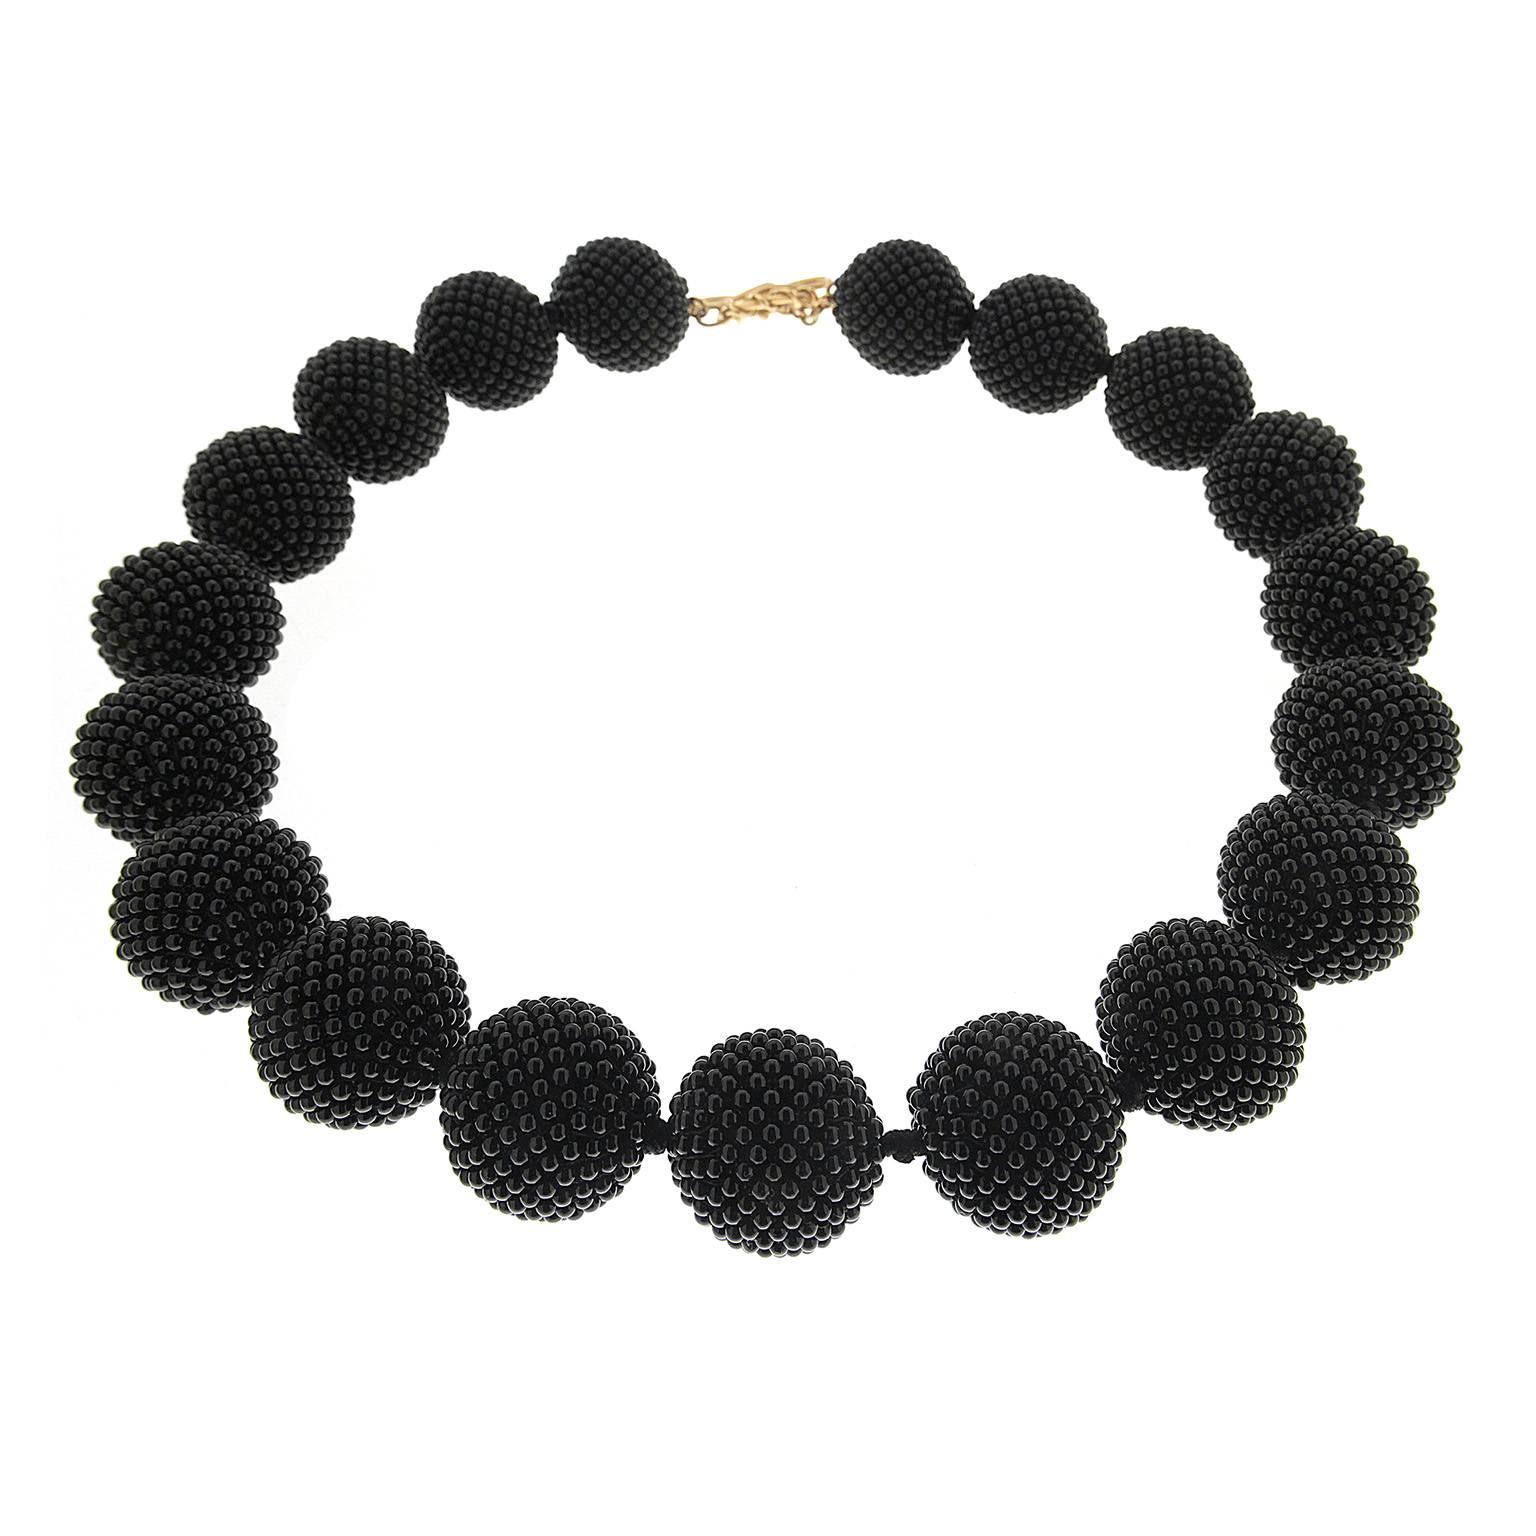 Valentin Magro Large Onyx Woven Ball Necklace feature complex beads. Tiny onyx pieces are woven into 19 balls, creating a textured surface. They’re placed on a single strand, with a knot between each ball. An 18k yellow gold knot and toggle clasp